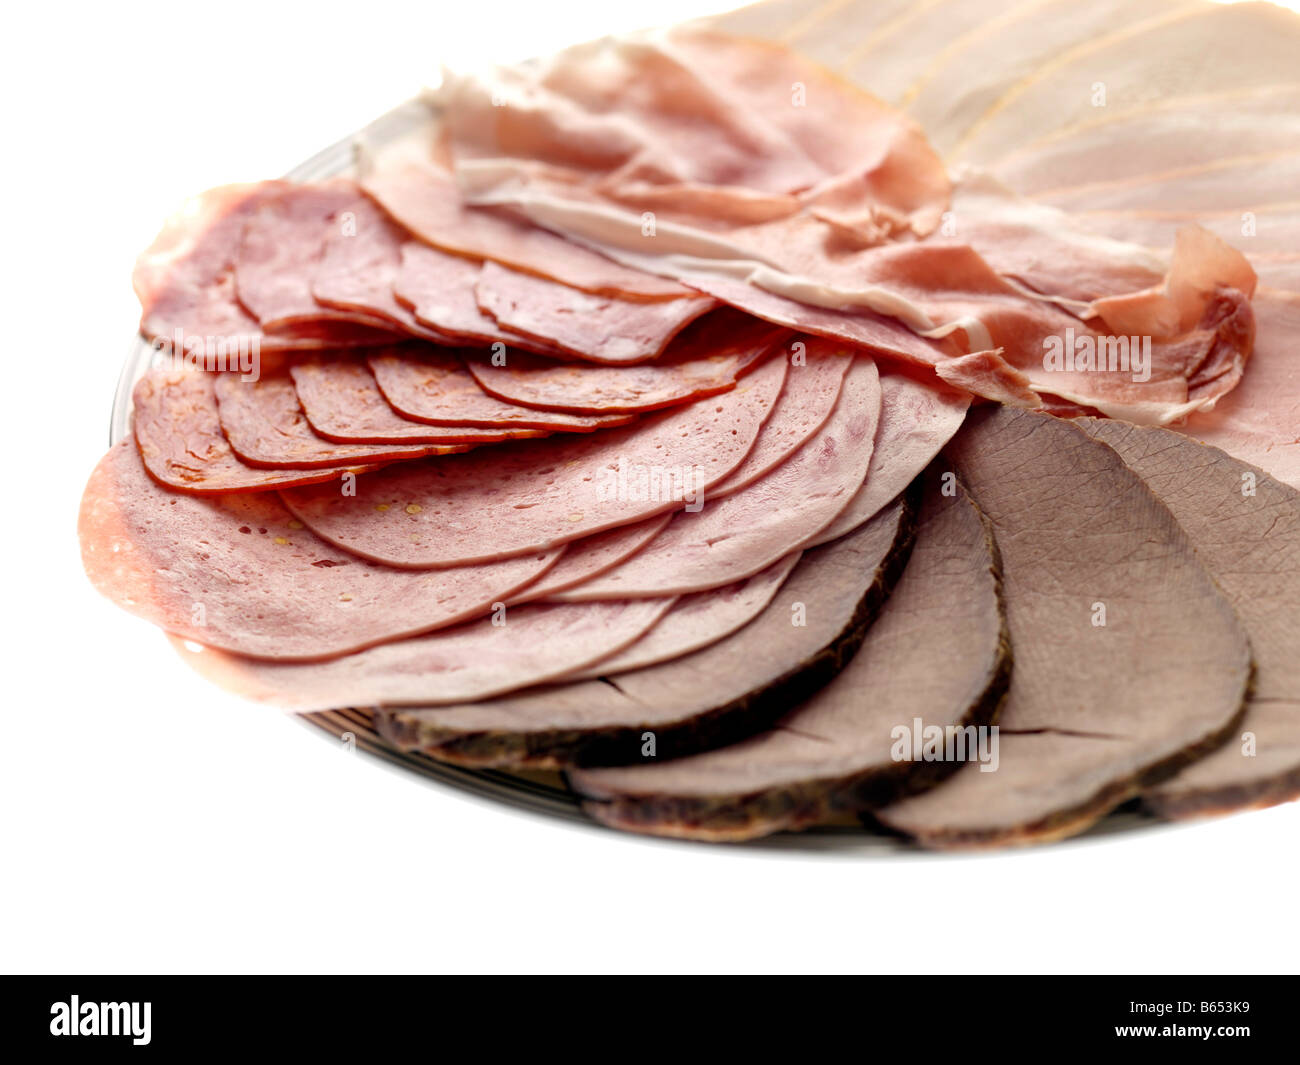 Cooked Meat Platter Stock Photo